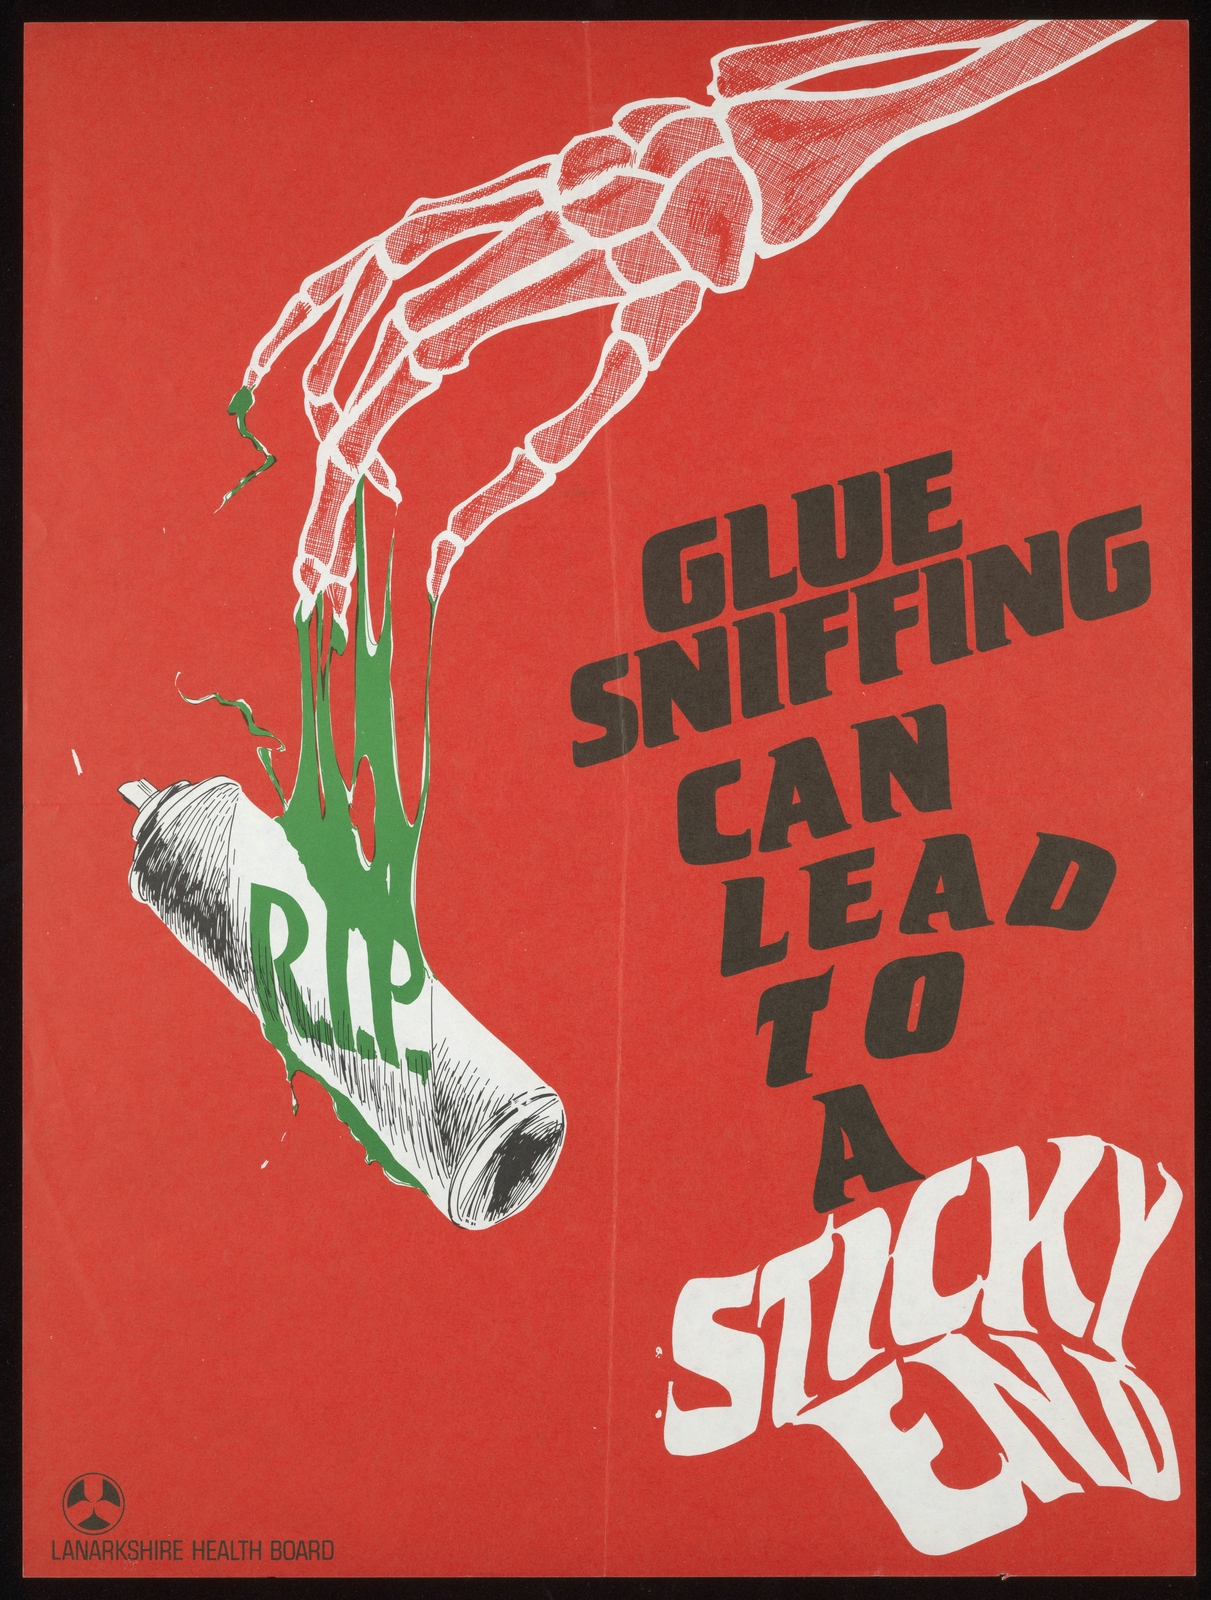 Bright red poster with an image of a skeletal hand and a can of glue, with the slogan 'Glue sniffing can lead to a sticky end'